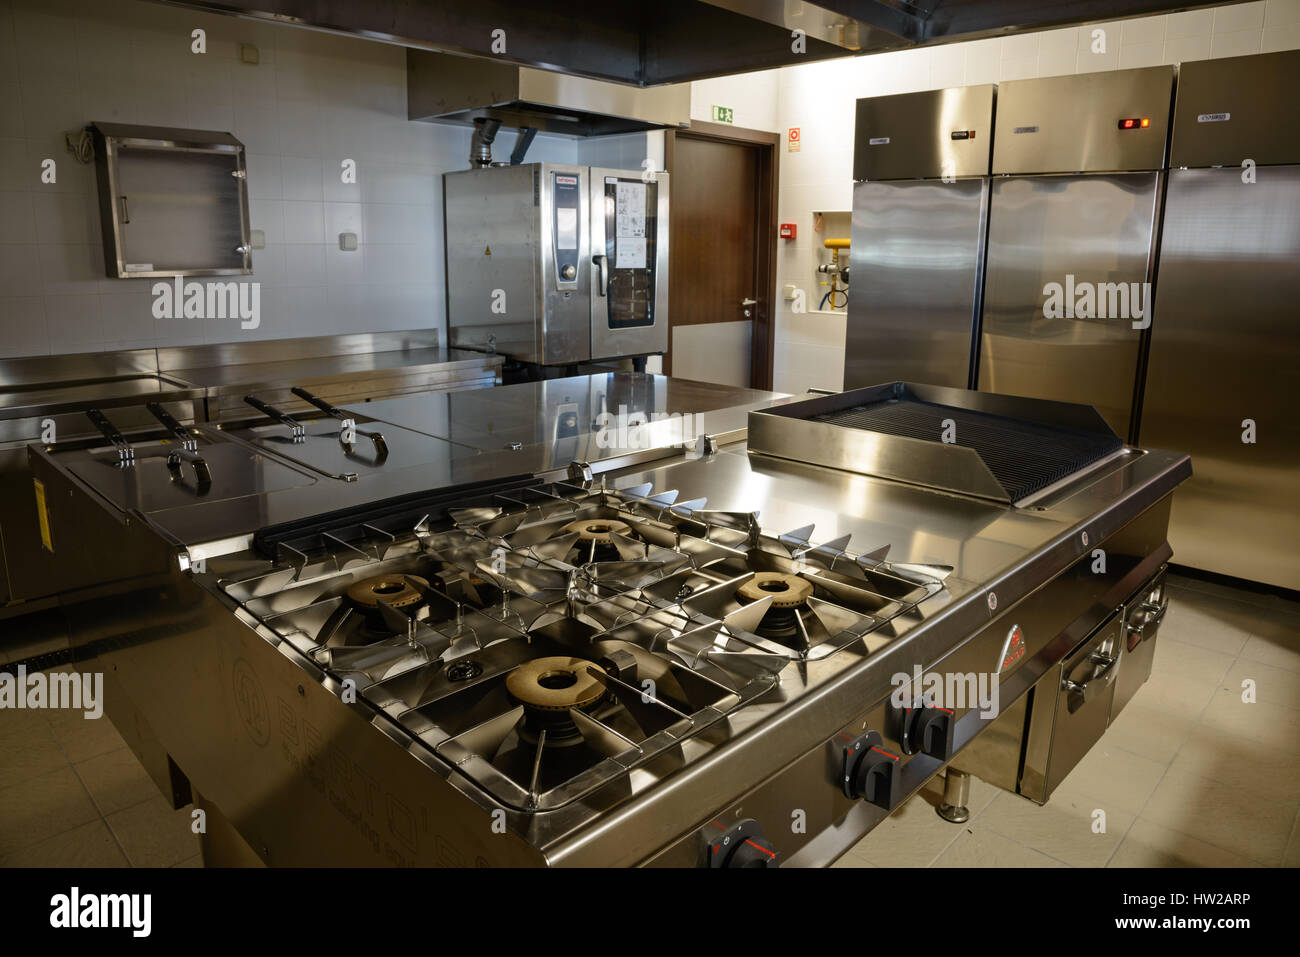 large and small pots in the industrial kitchen on the stove inside the  restaurant during the preparation of food Stock Photo - Alamy